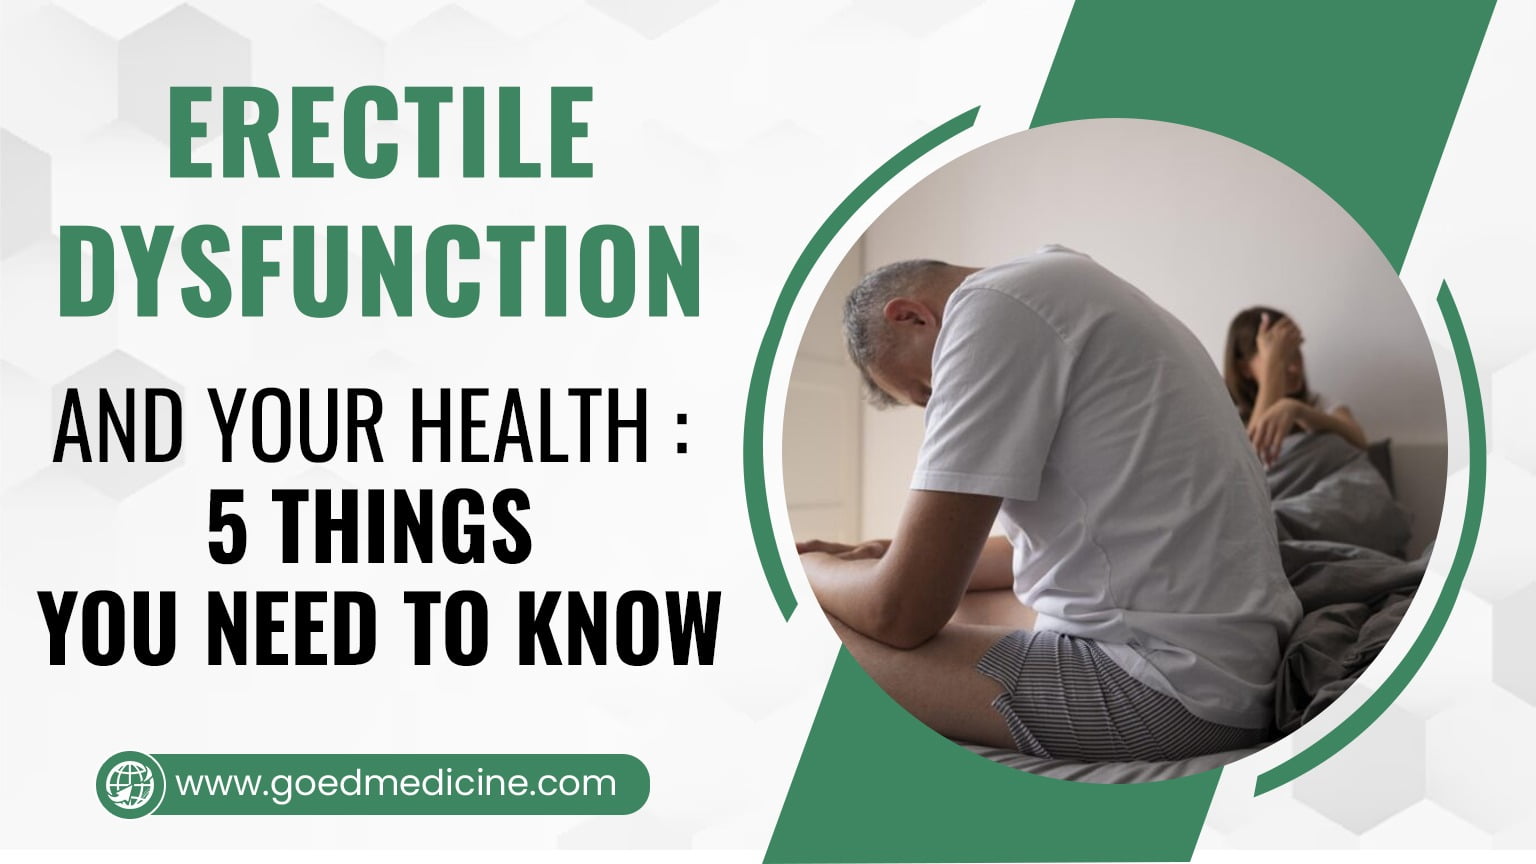 Erectile Dysfunction and Your Health